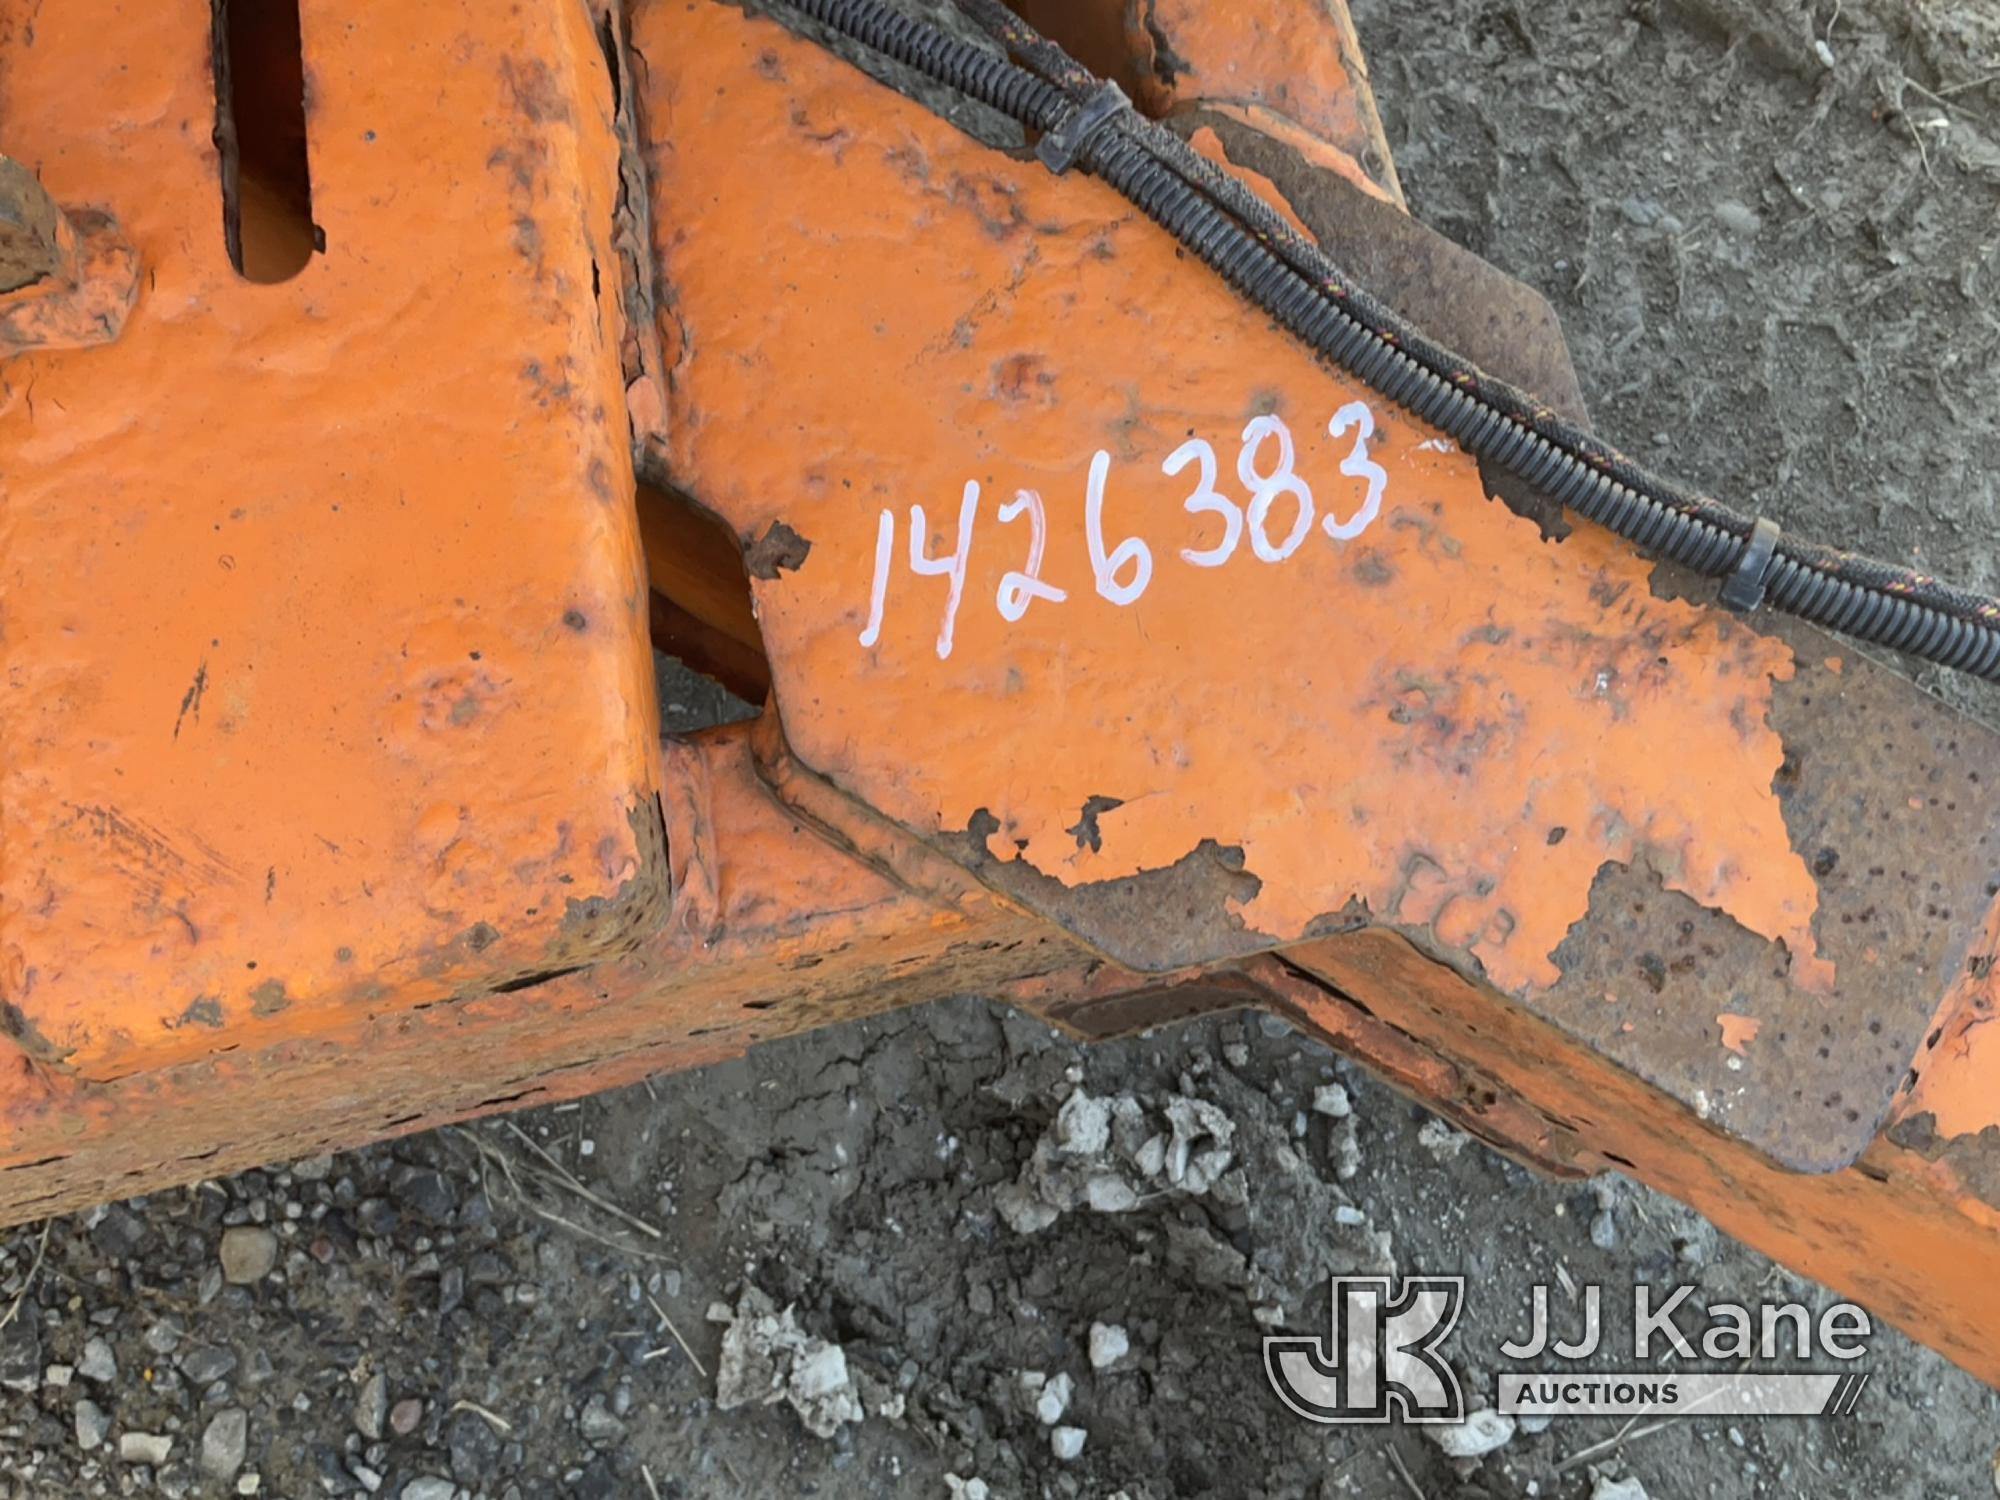 (Rome, NY) 2015 Altec DC1317 Chipper (13in Disc) Not Running, Condition Unknown, Rust Damage